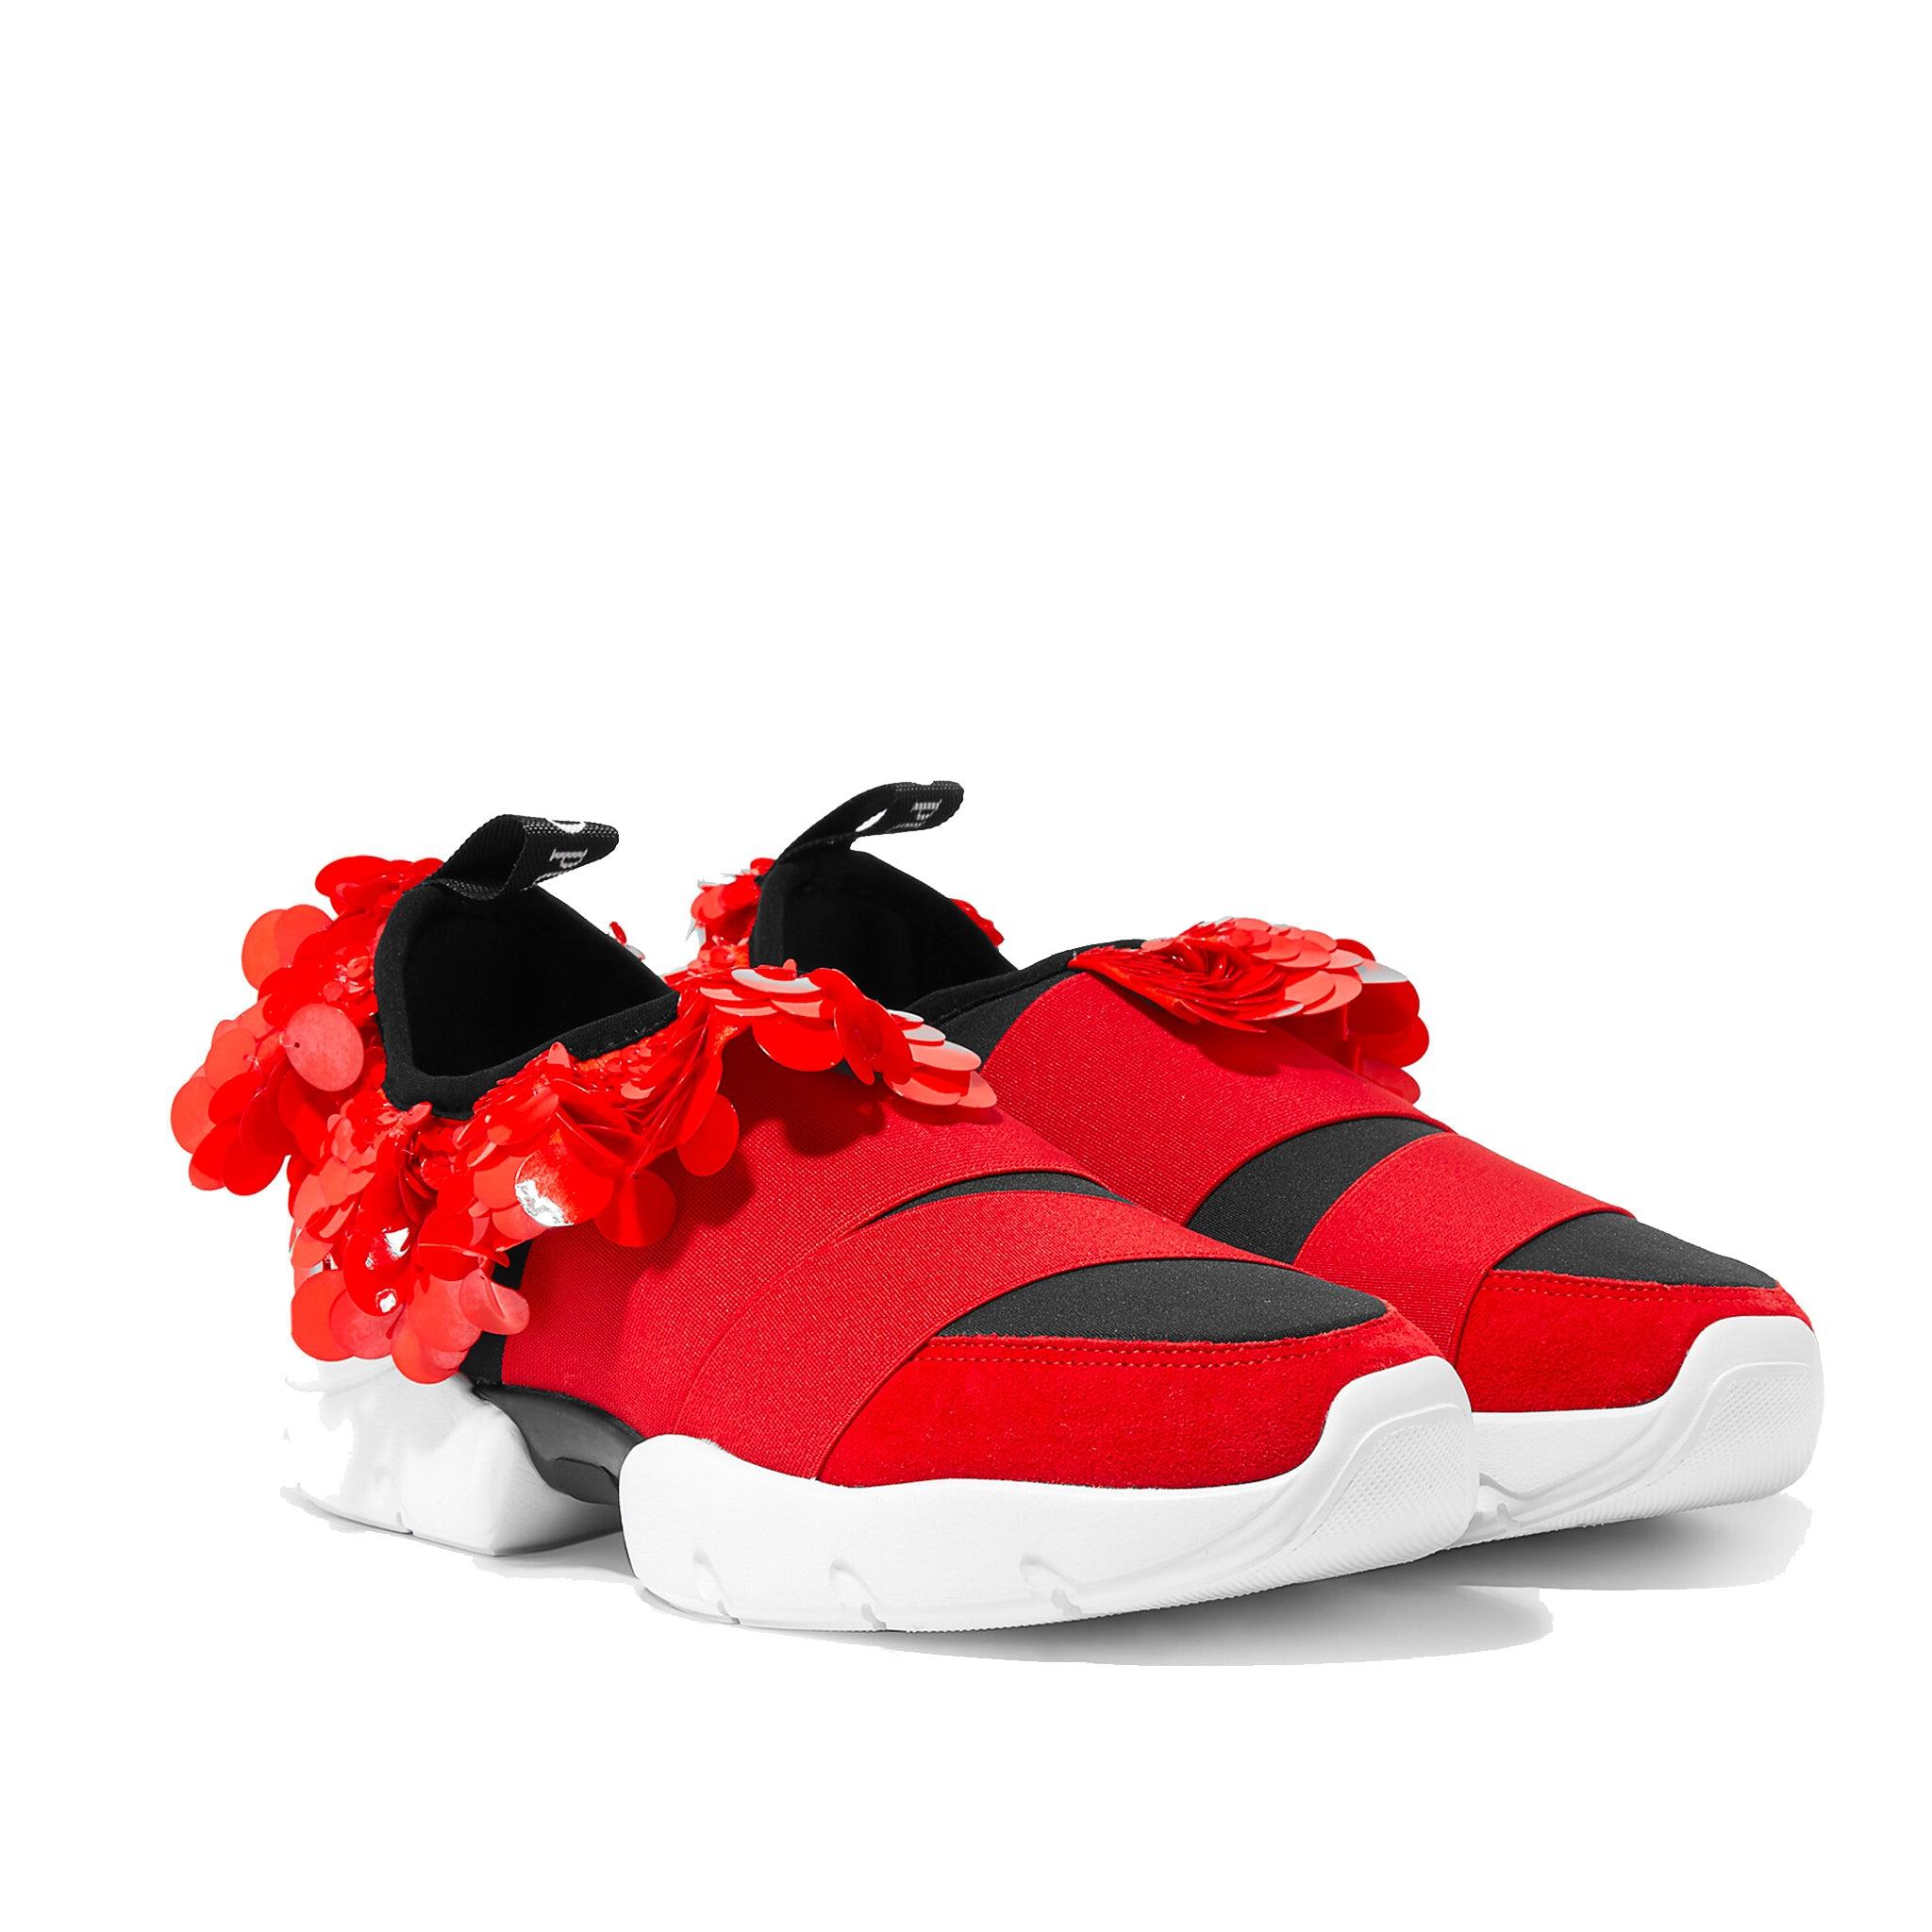 Emilio Pucci City One Frill Sneakers in Red | Lyst